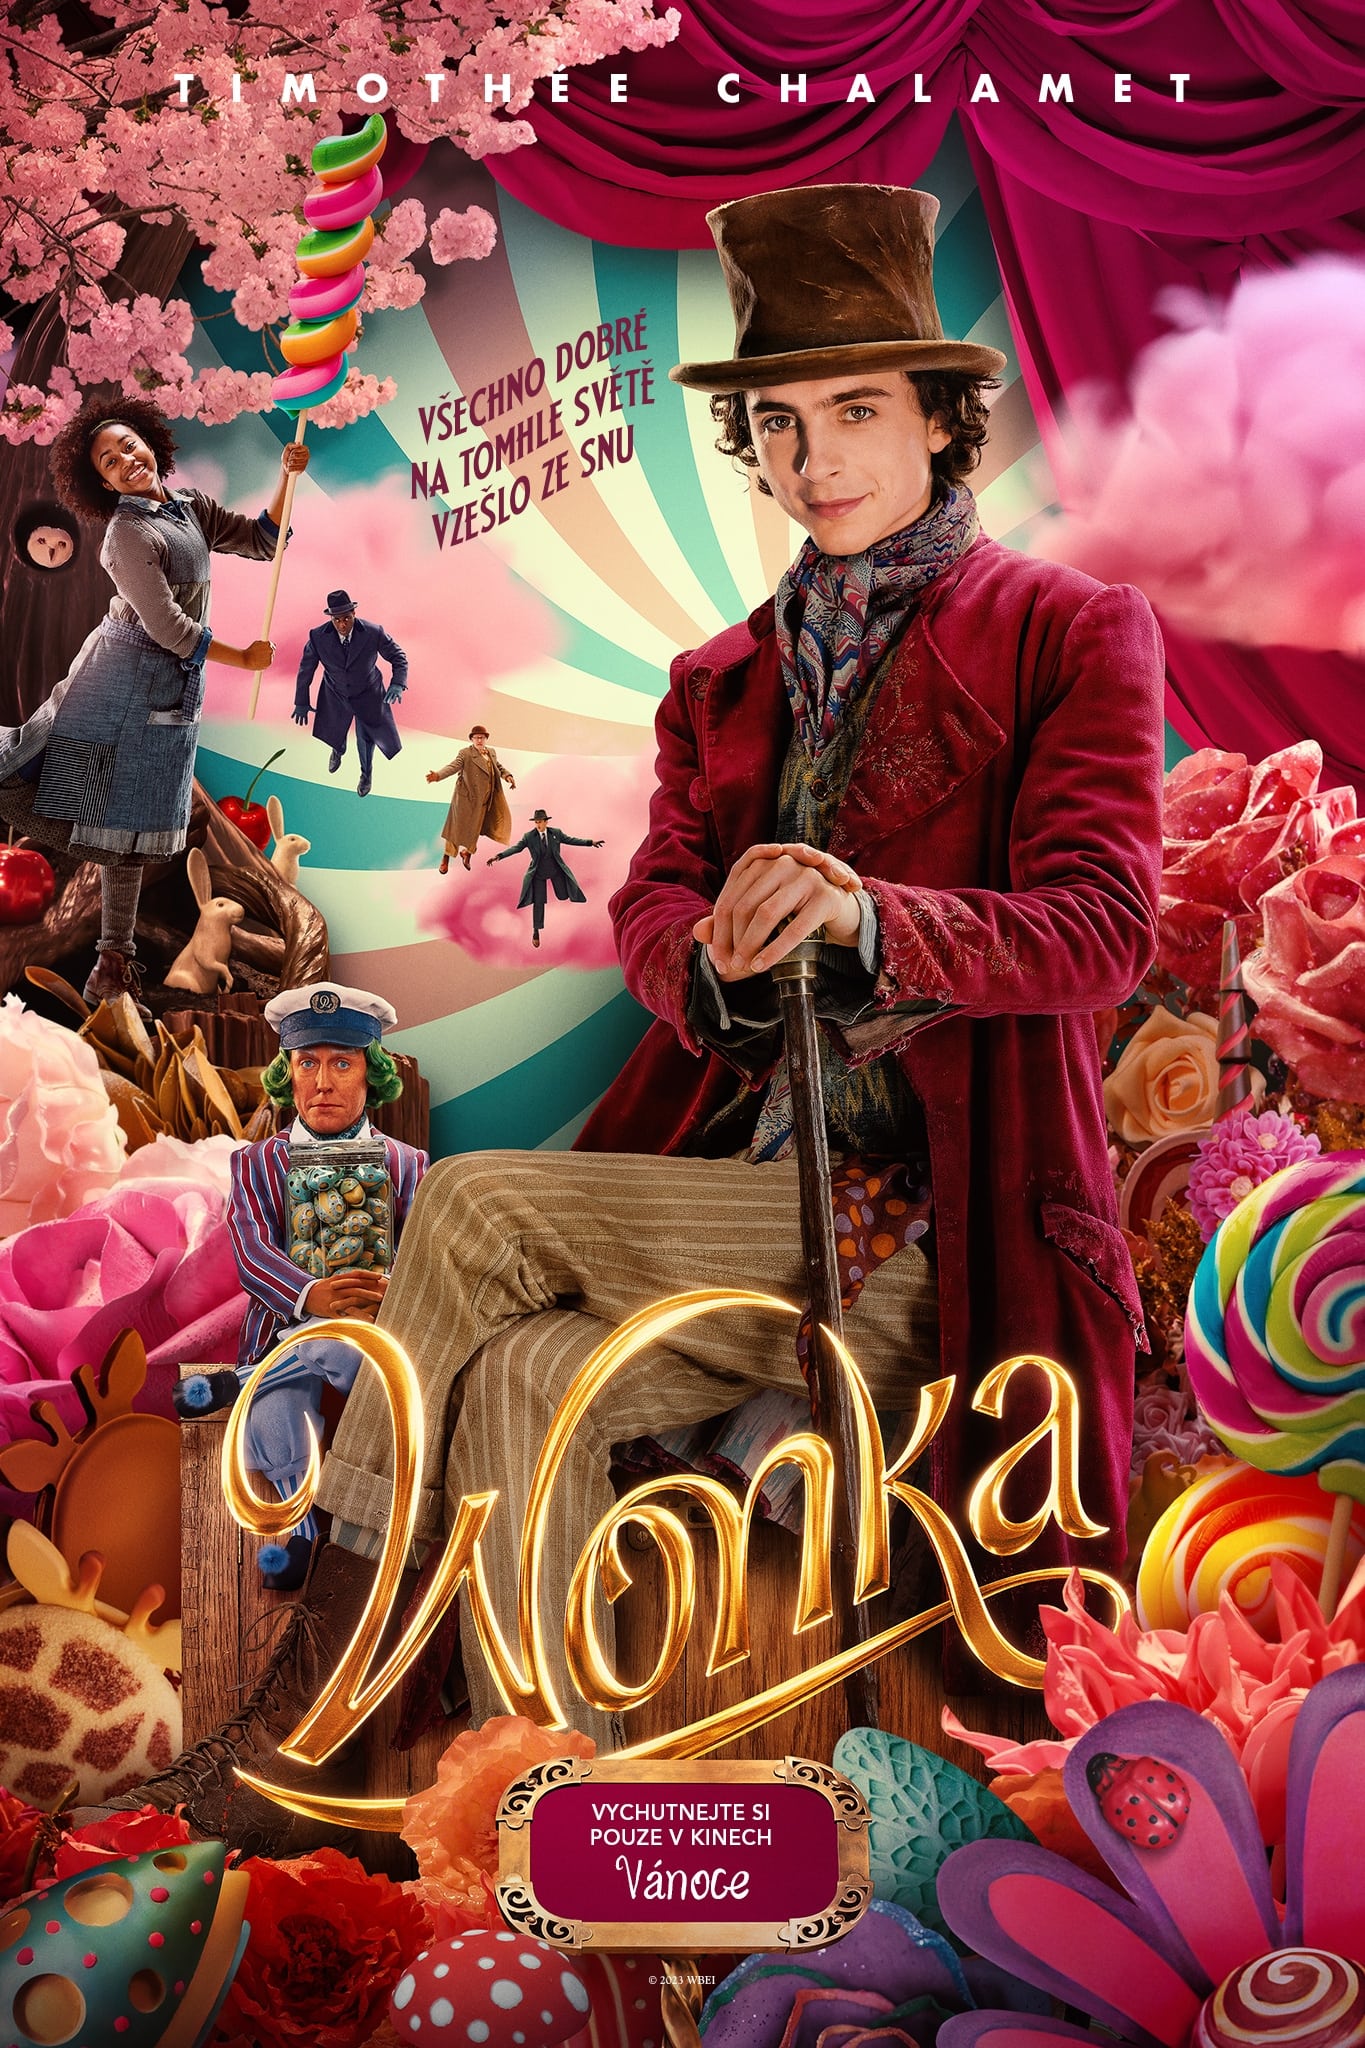 Poster for the movie "Wonka"